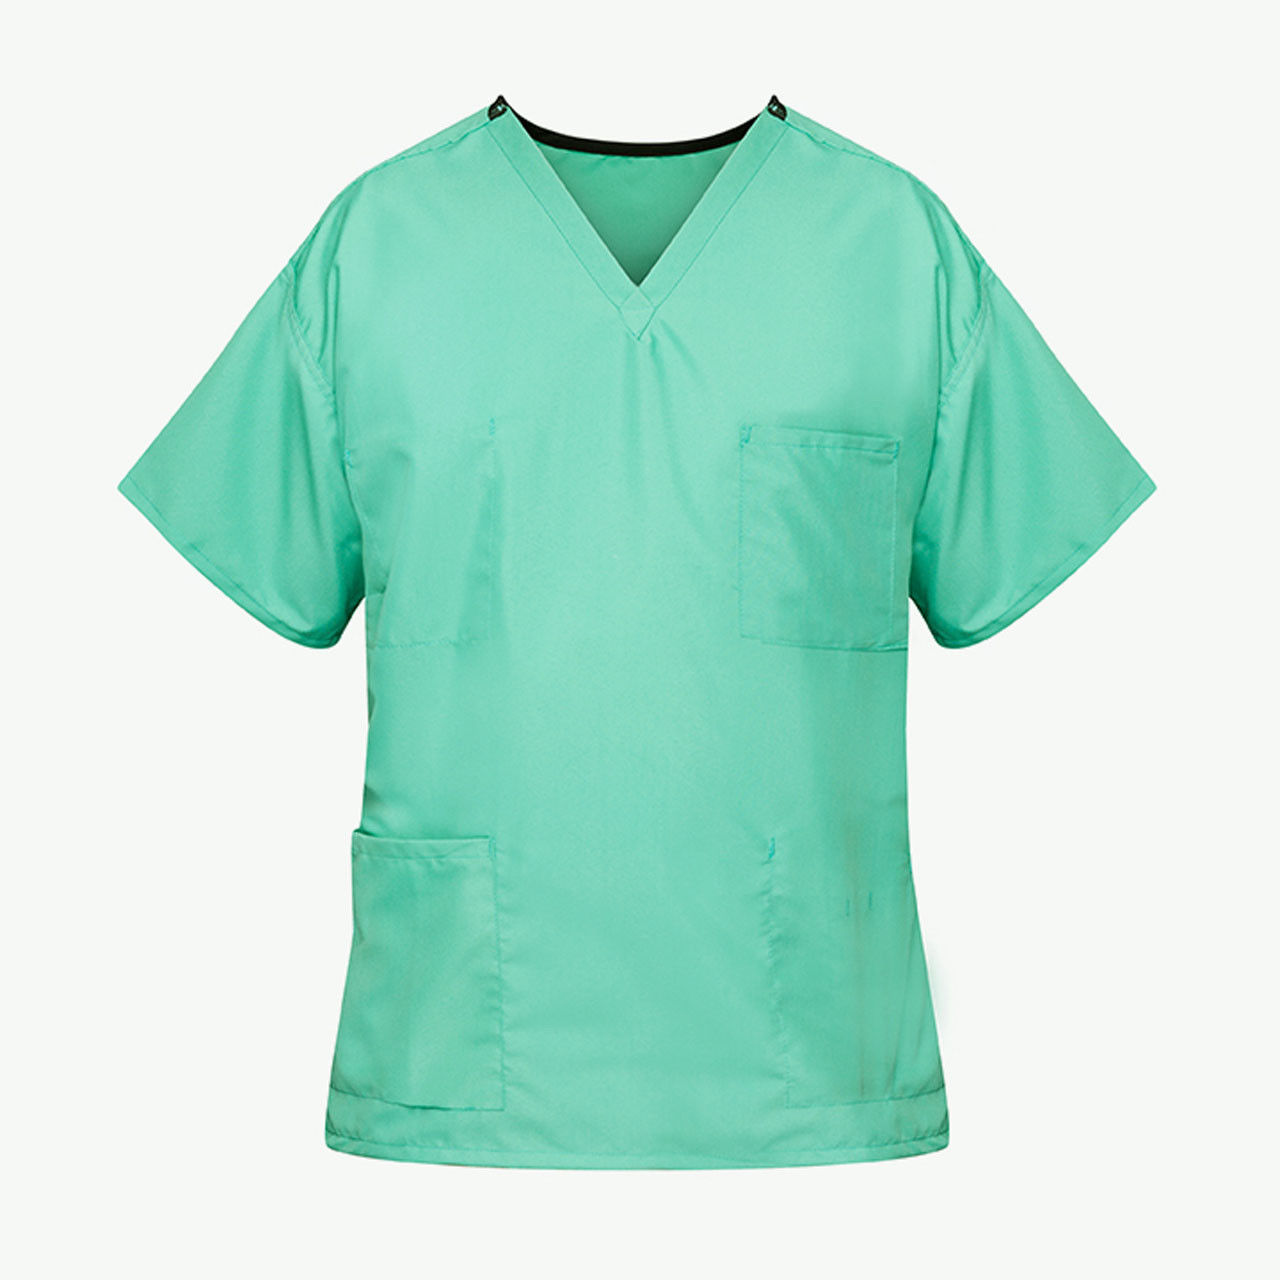 What is the ideal alpha-size for jade green scrubs?